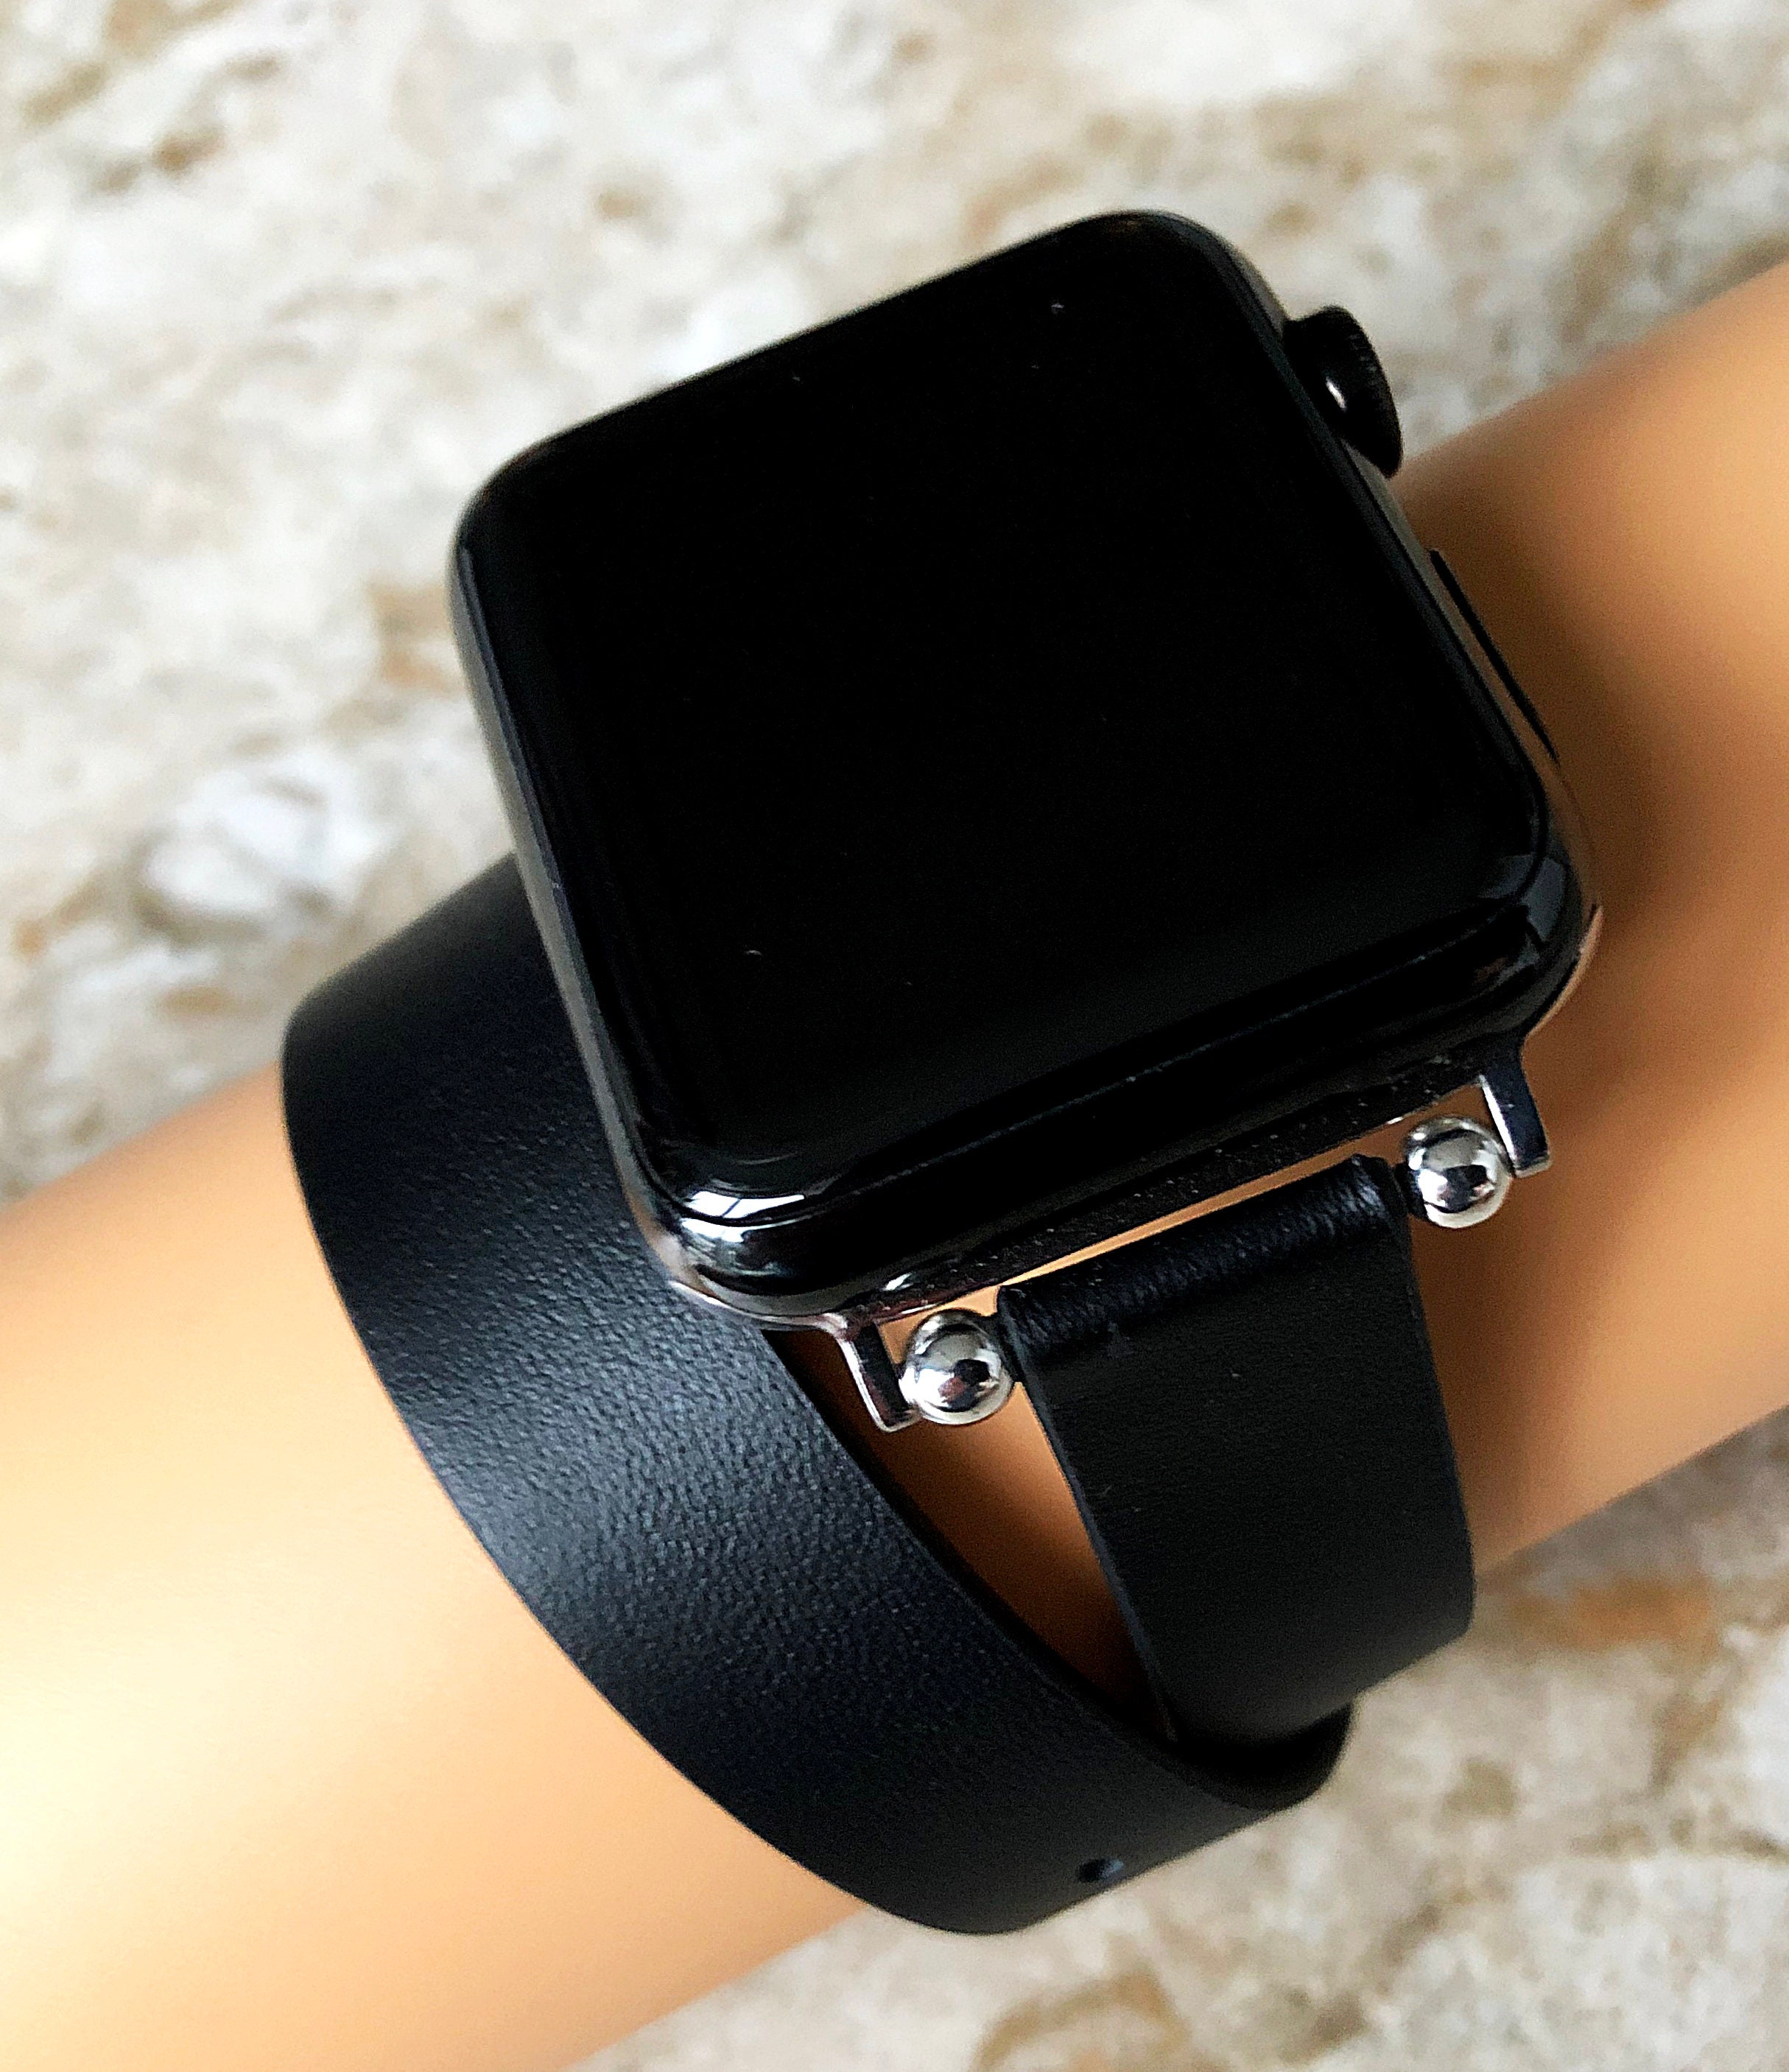 Hands on with Cuff and Double Tour Hermès Apple Watch knockoff bands